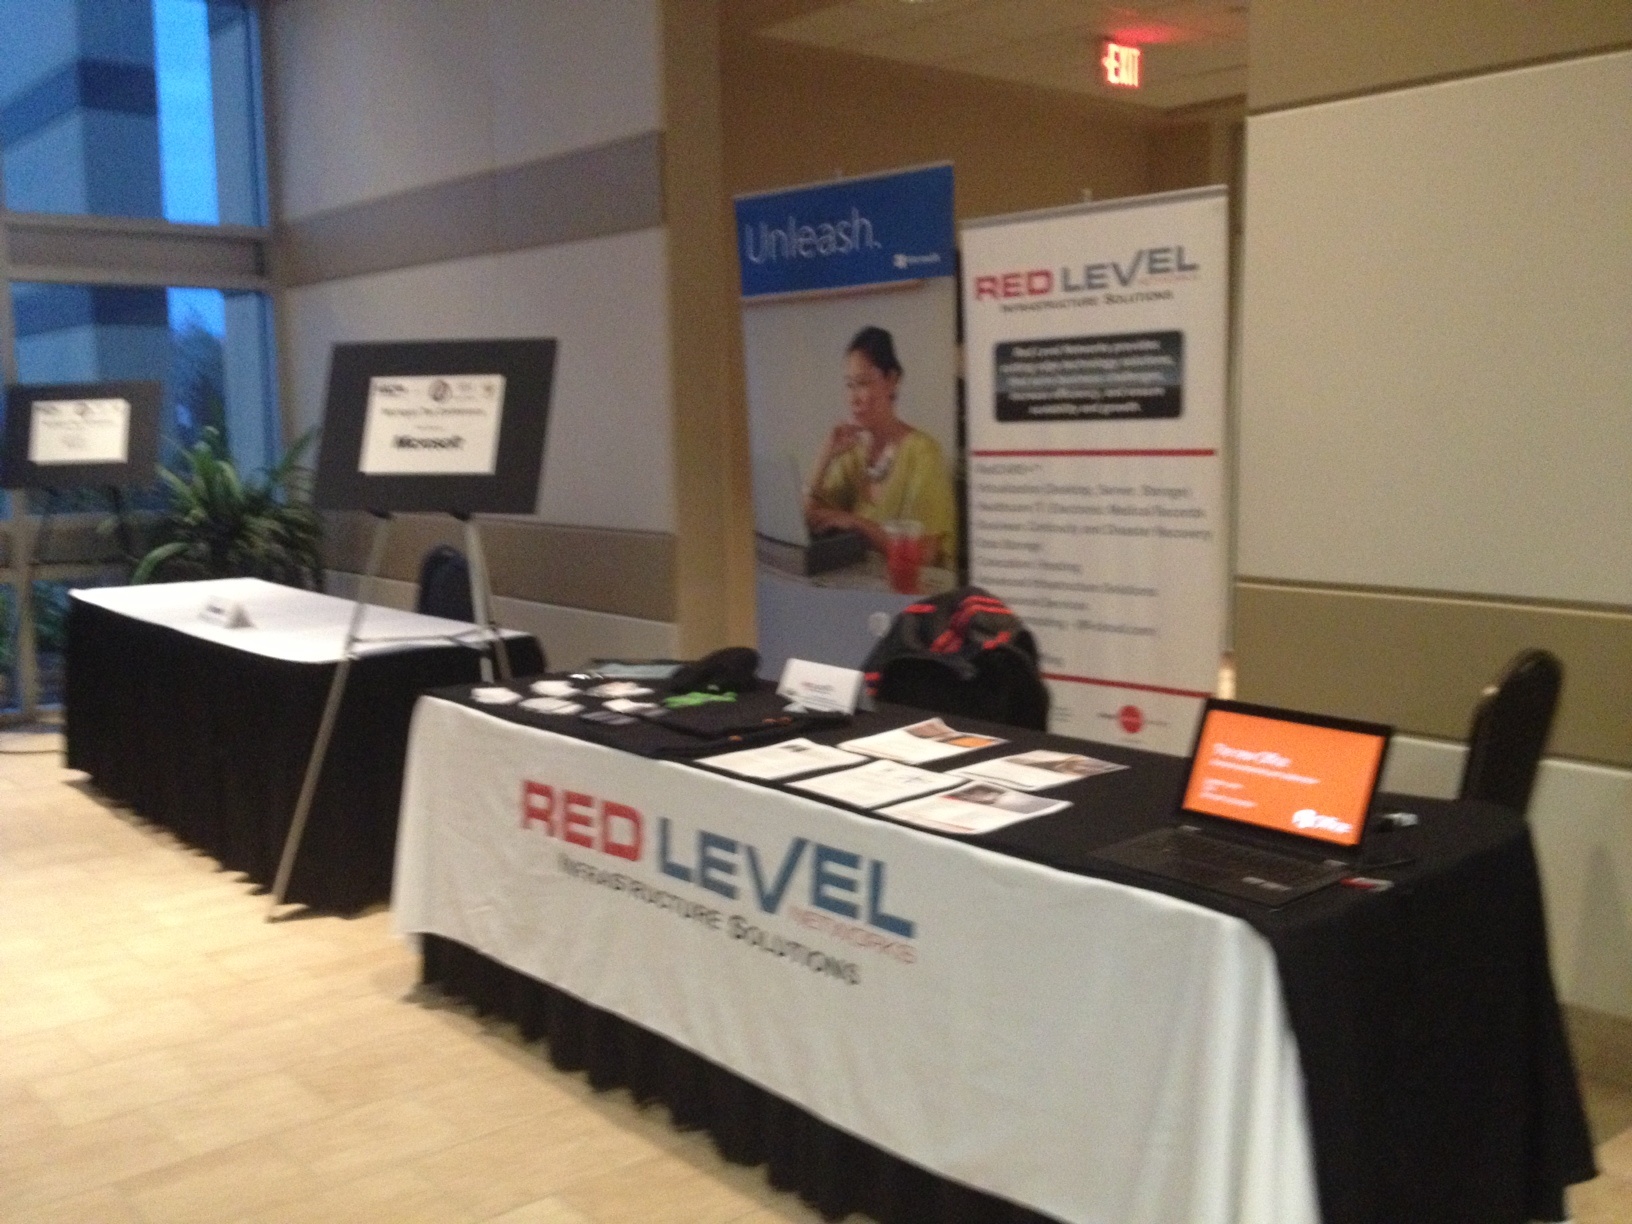 Red Level Conference Booth